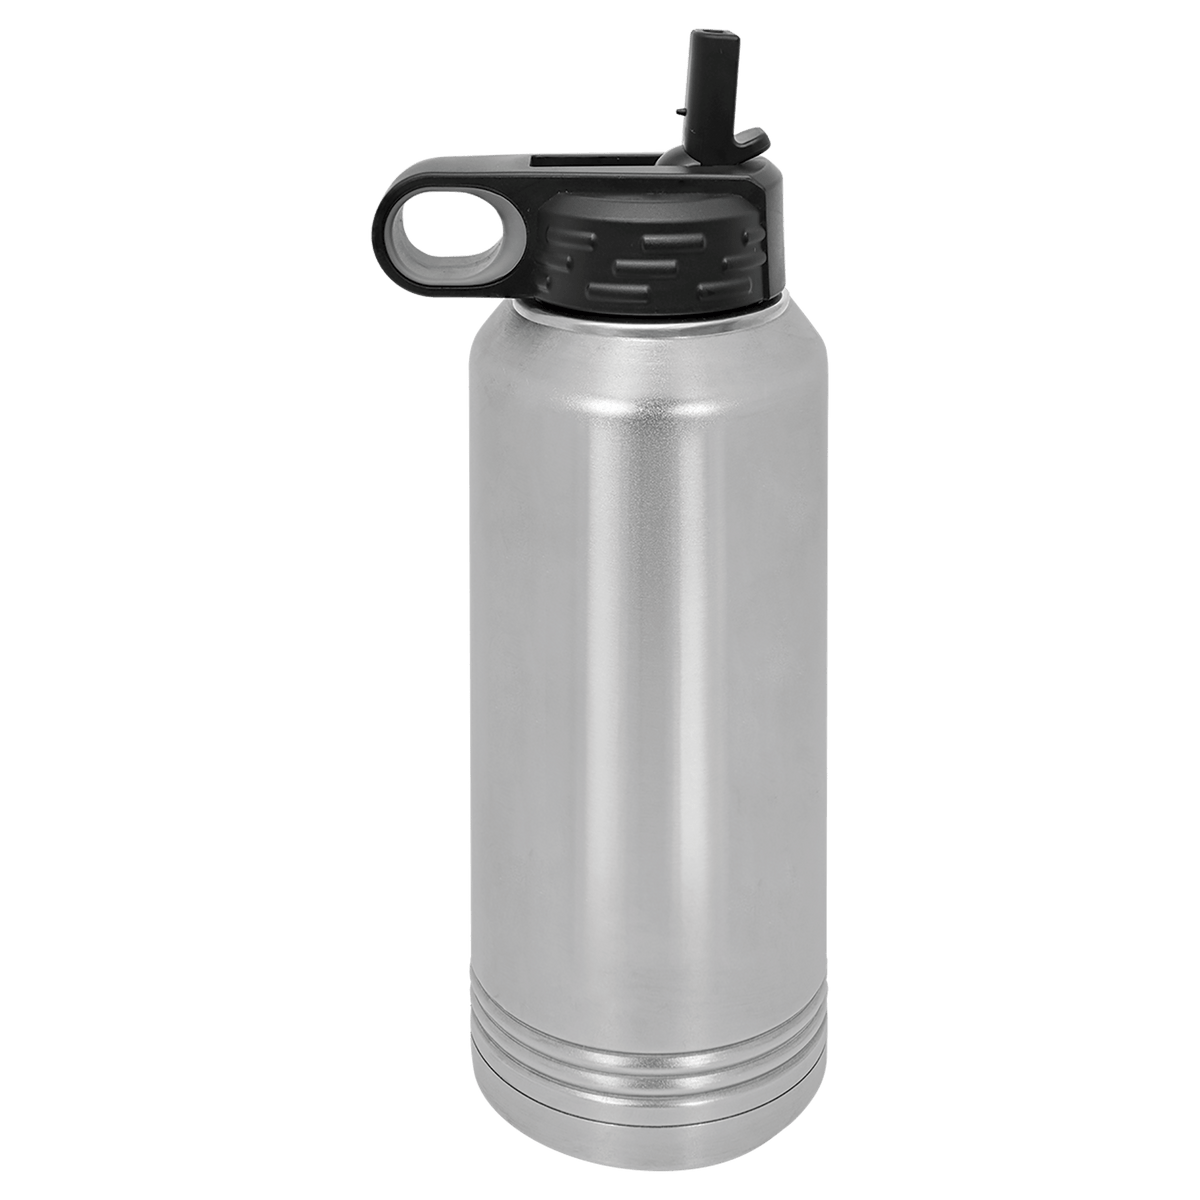 32 oz. Stainless Steel Polar Camel Water Bottle Stainless Steal